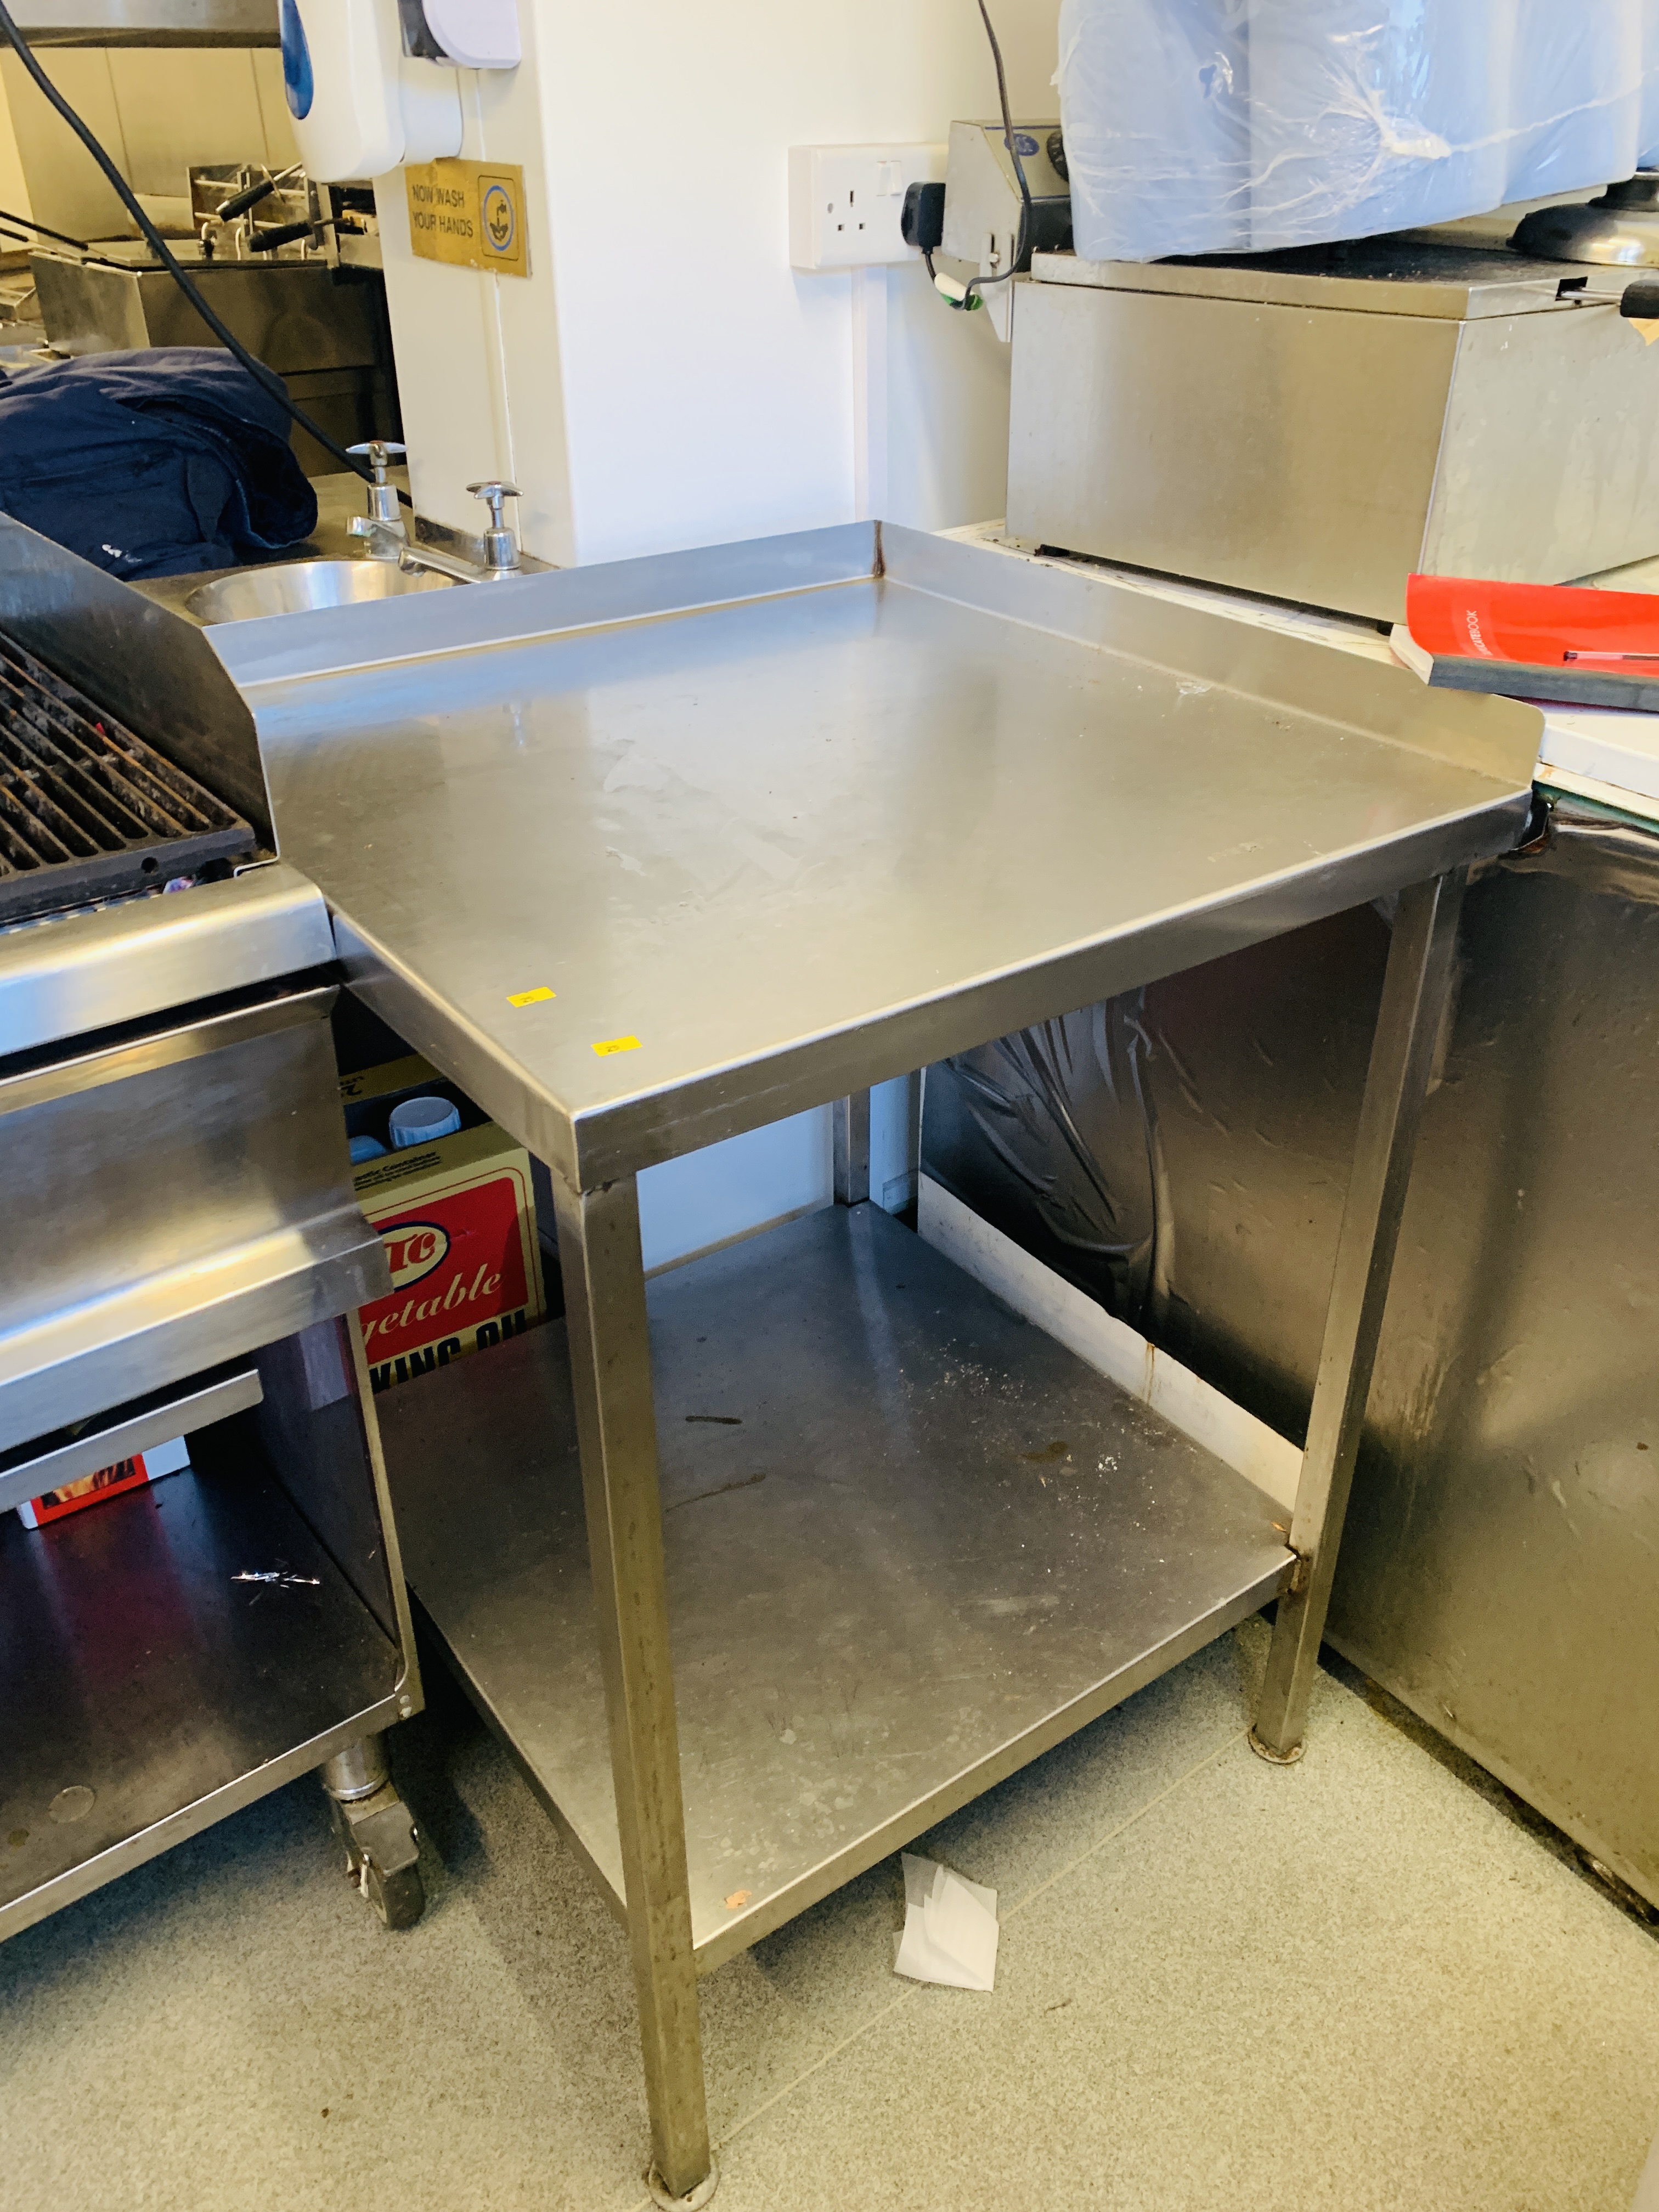 2 X STAINLESS STEEL TWO TIER CORNER CATERING PREPARATION TABLE - W 70CM. D 70CM. - Image 4 of 6